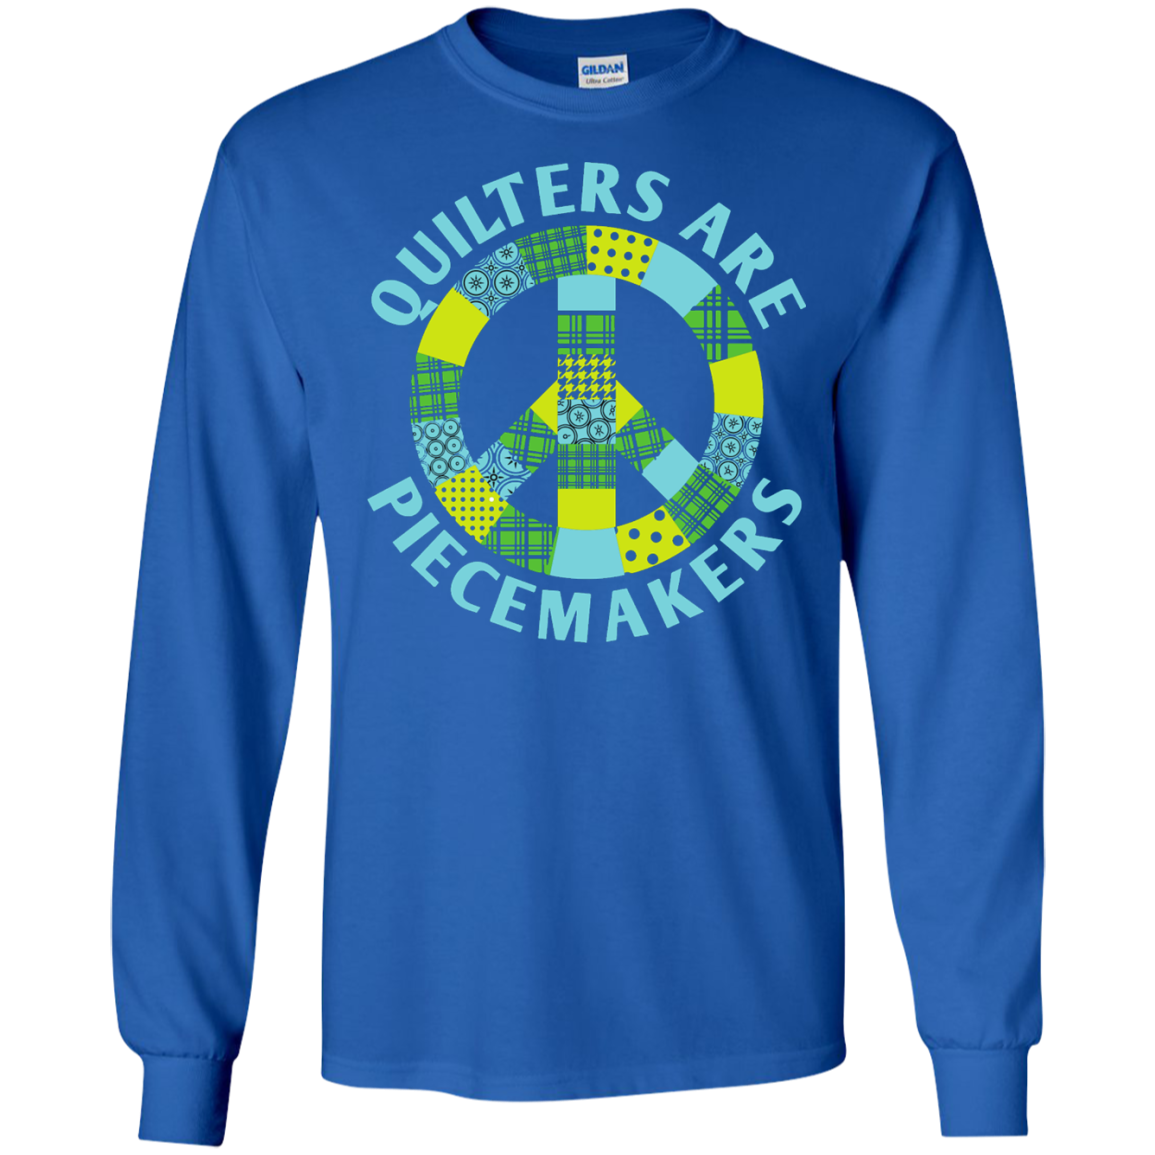 Quilters are Piecemakers Long Sleeve Ultra Cotton T-Shirt - Crafter4Life - 9